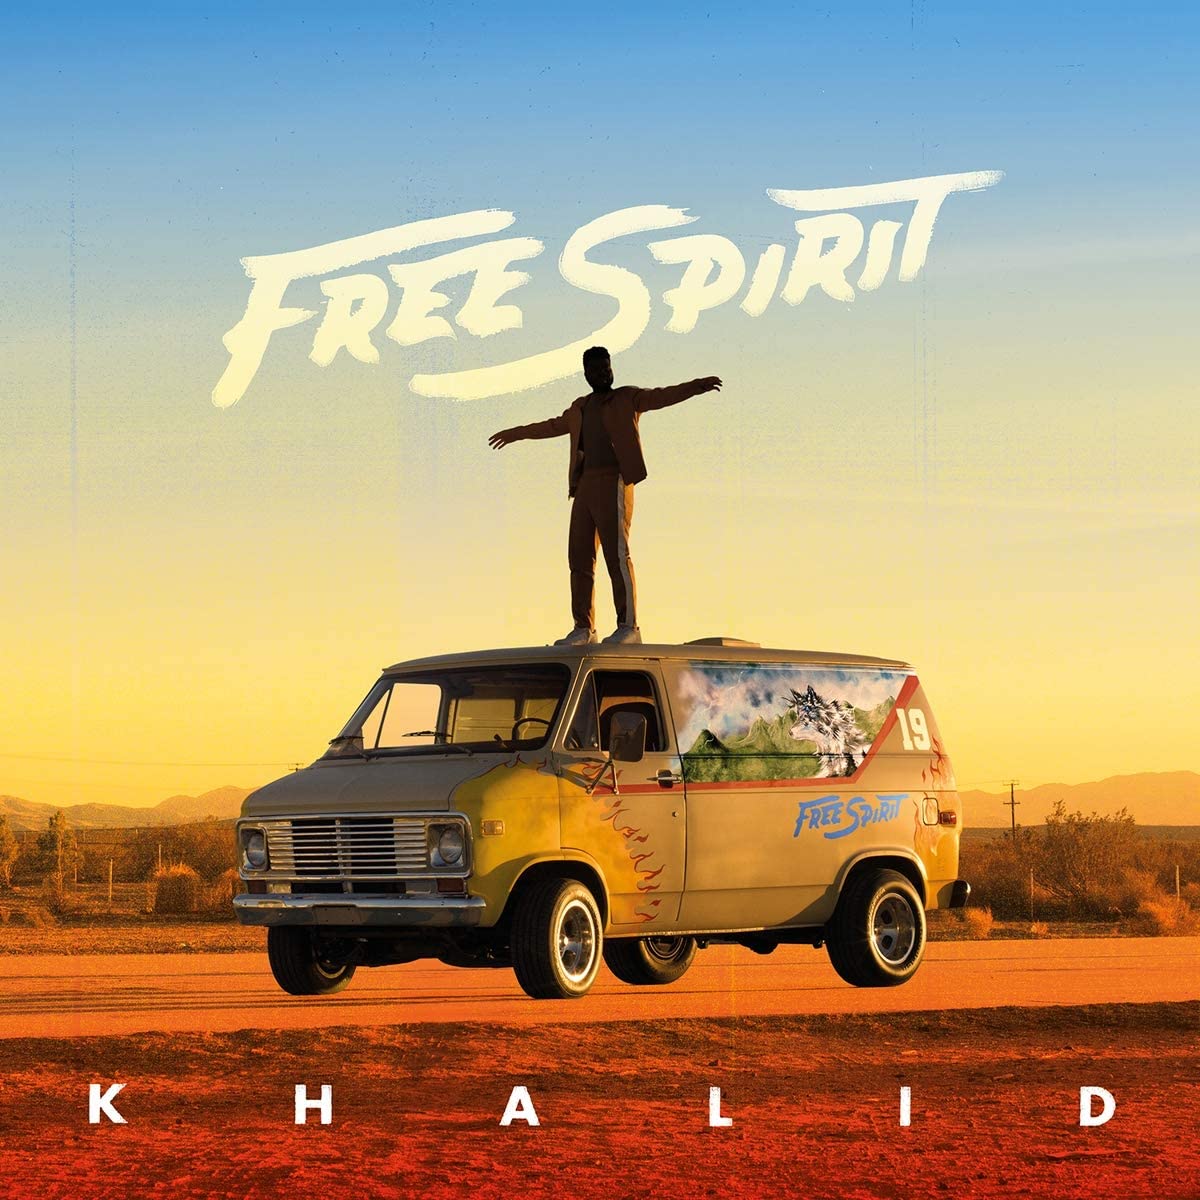 2nd studio album on Vinyl from multi-platinum, award-winning global superstar, Khalid, who has catapulted into massive worldwide success since his first single 'Location' was released in 2016. The album's release is accompanied by a special companion film, also titled 'Free Spirit'.